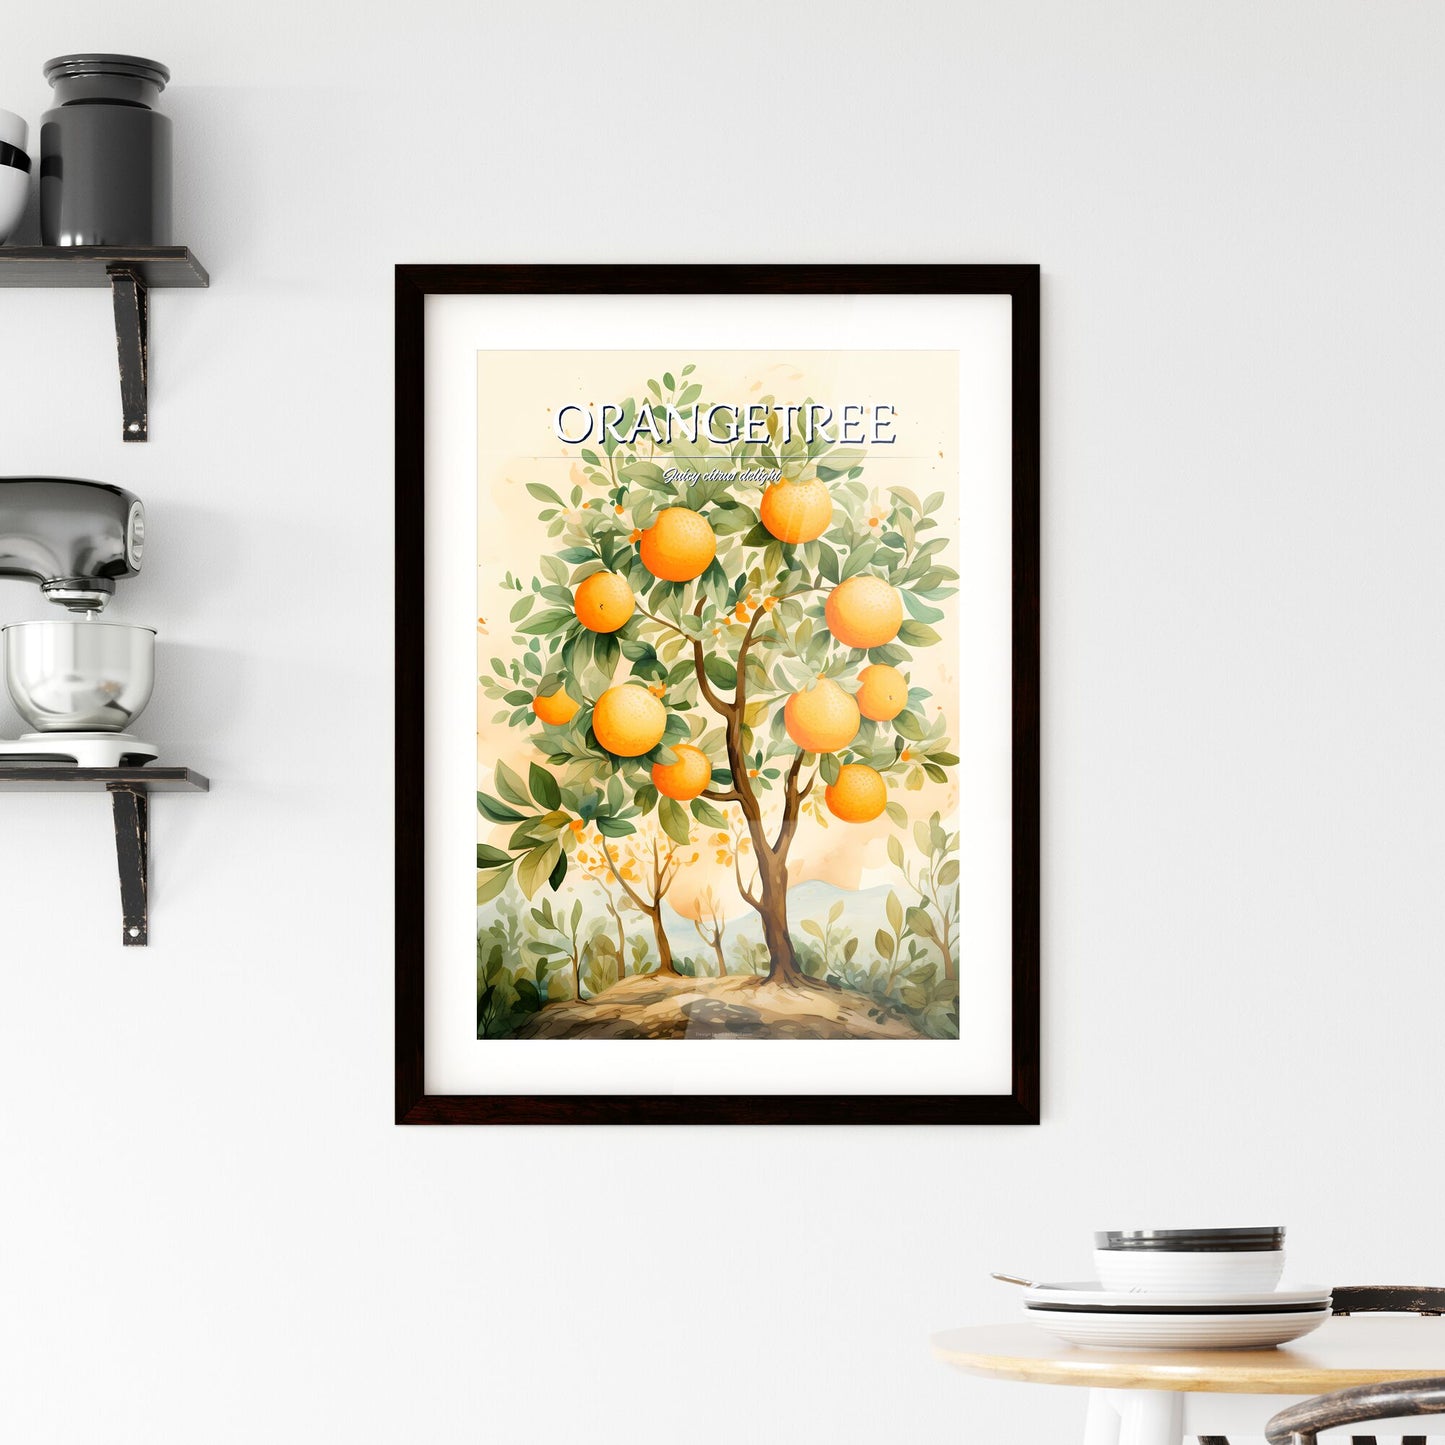 A Painting Of A Tree With Oranges Default Title